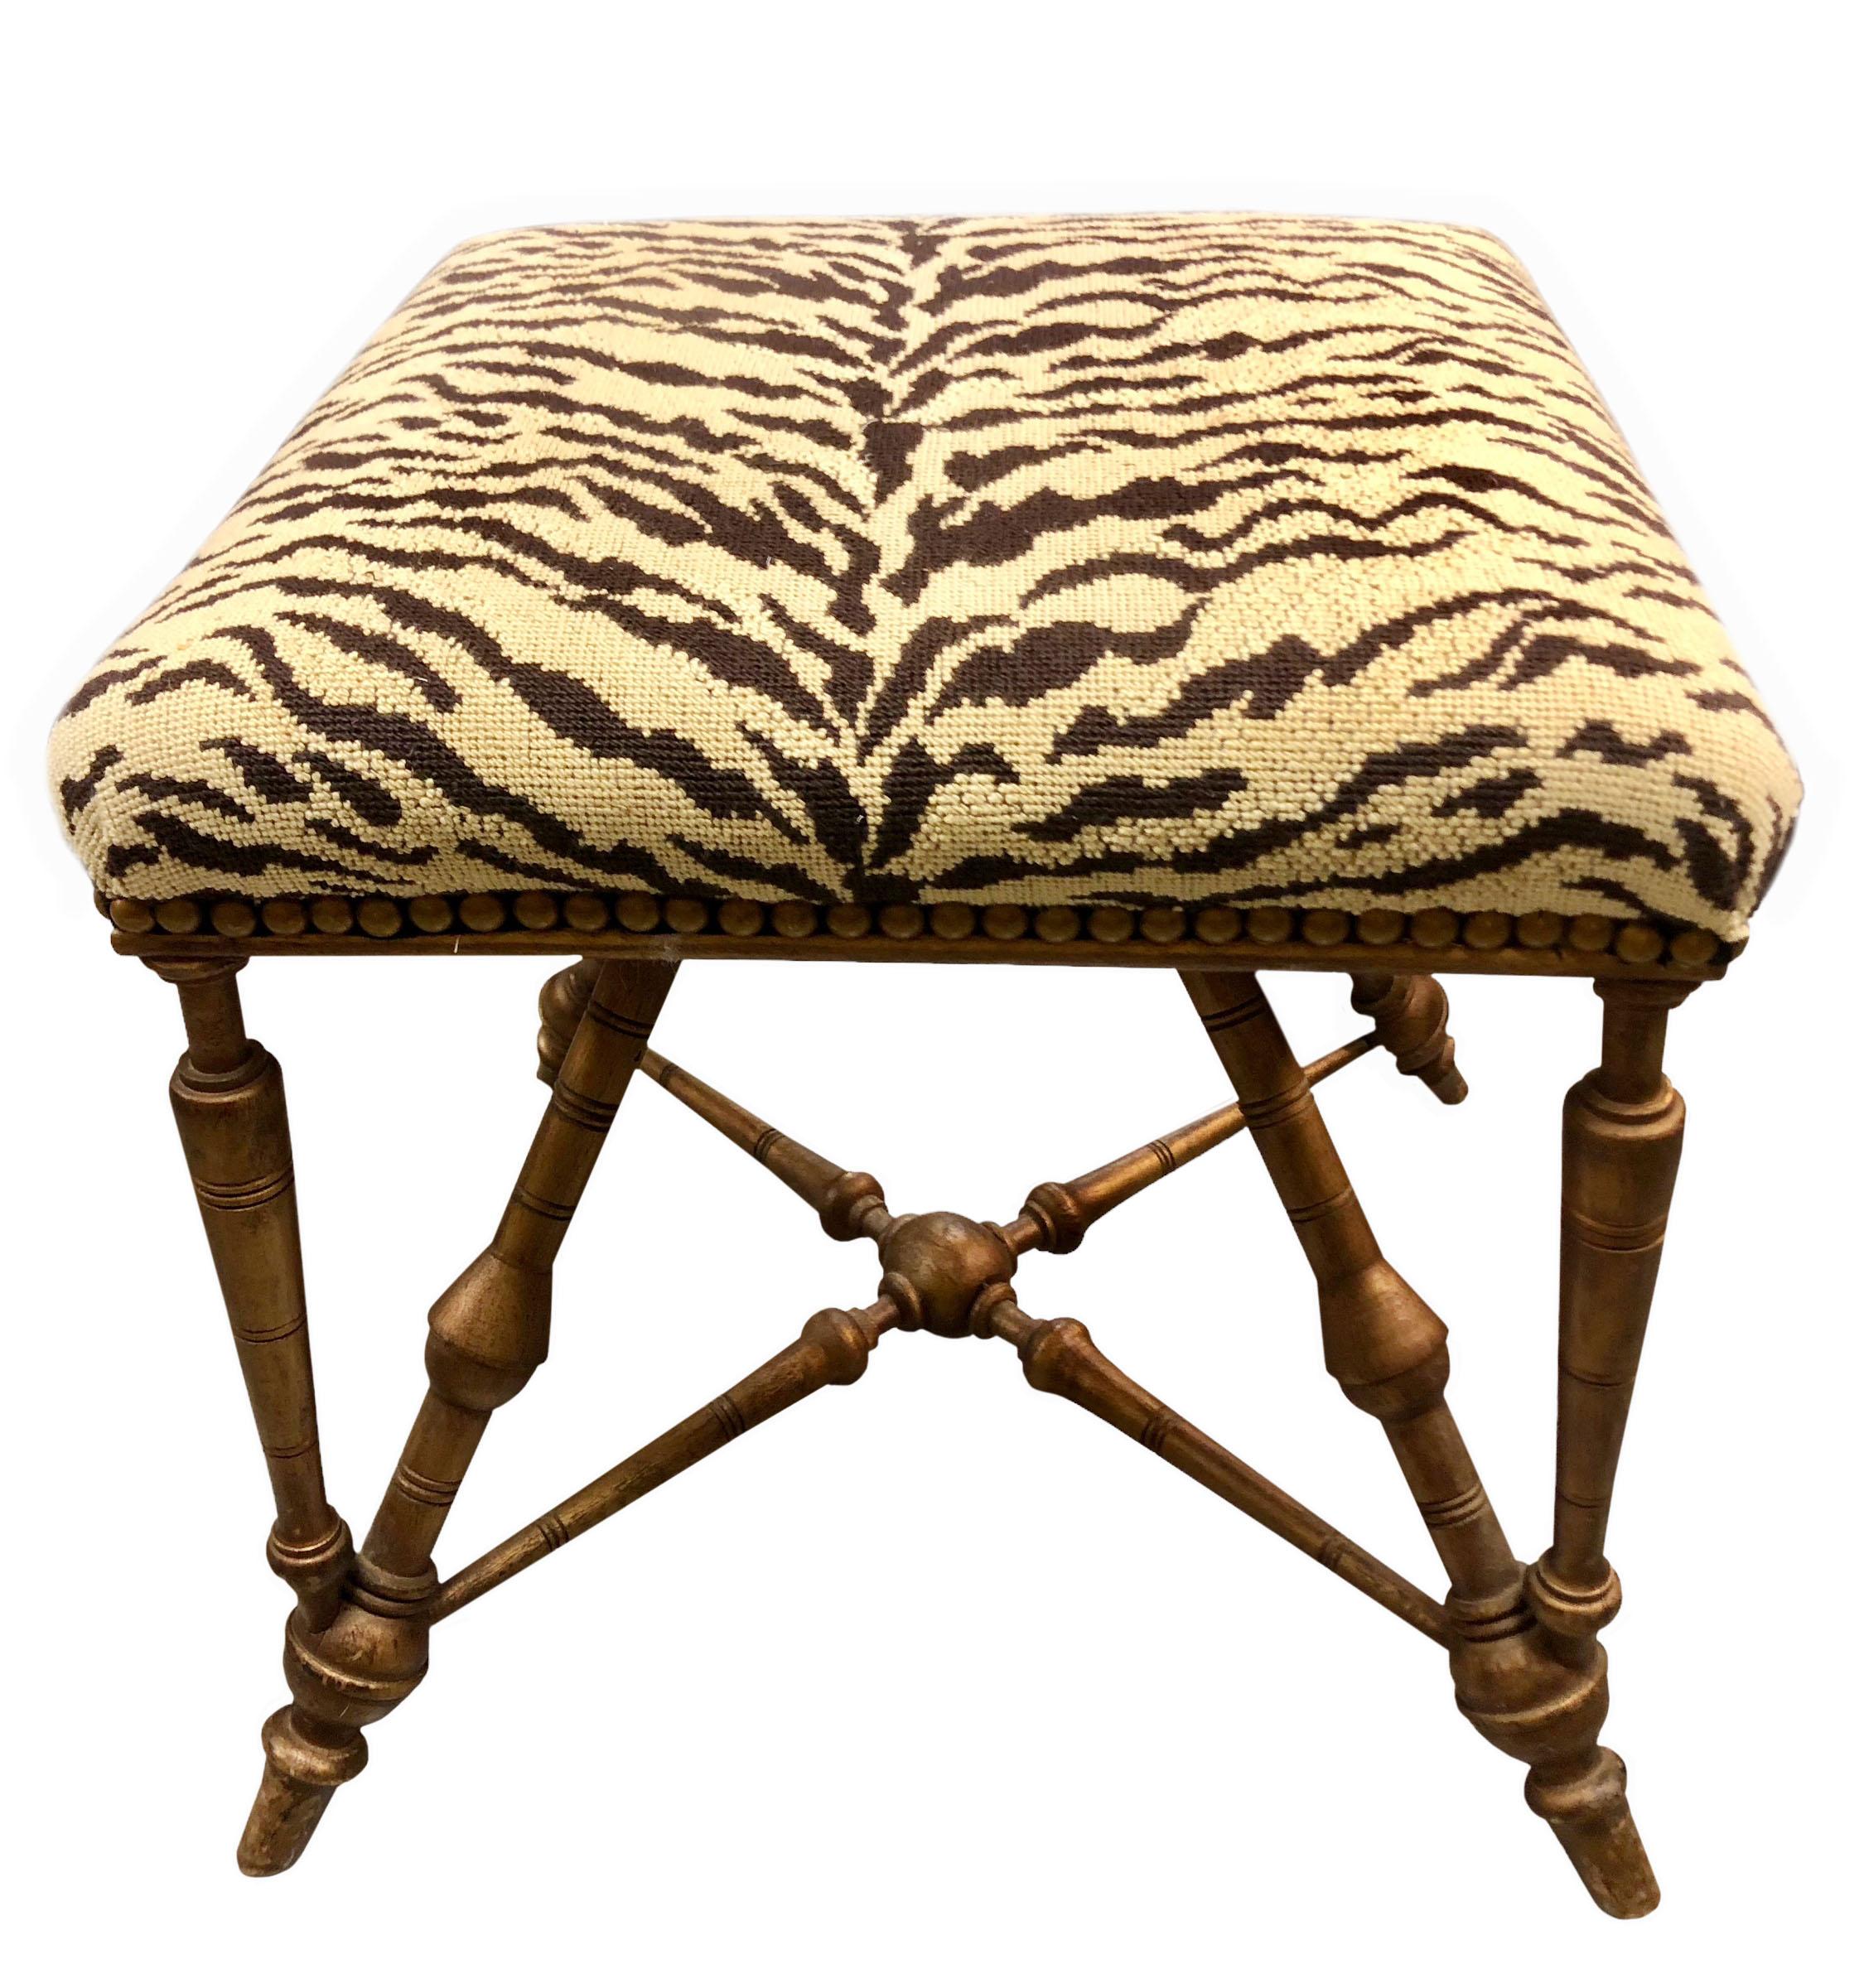 French late 19th century gold bamboo stool reupholstered with vintage,1980s gold and black cotton Scalamandré tiger fabric that appears embroidered. Antique colored nail heads.